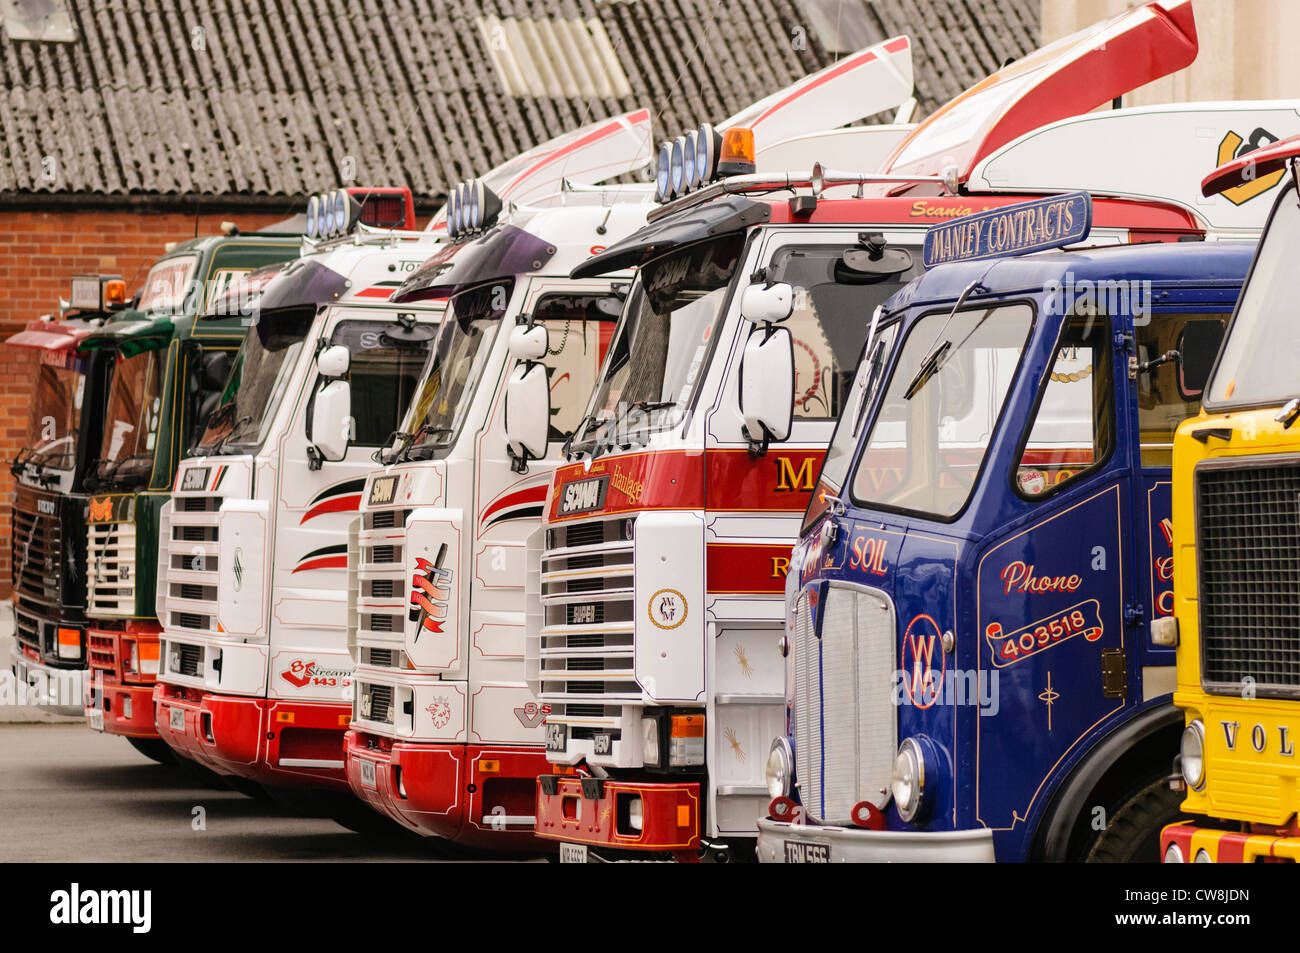 Number of lorries/trucks parked up in a row Stock Photo